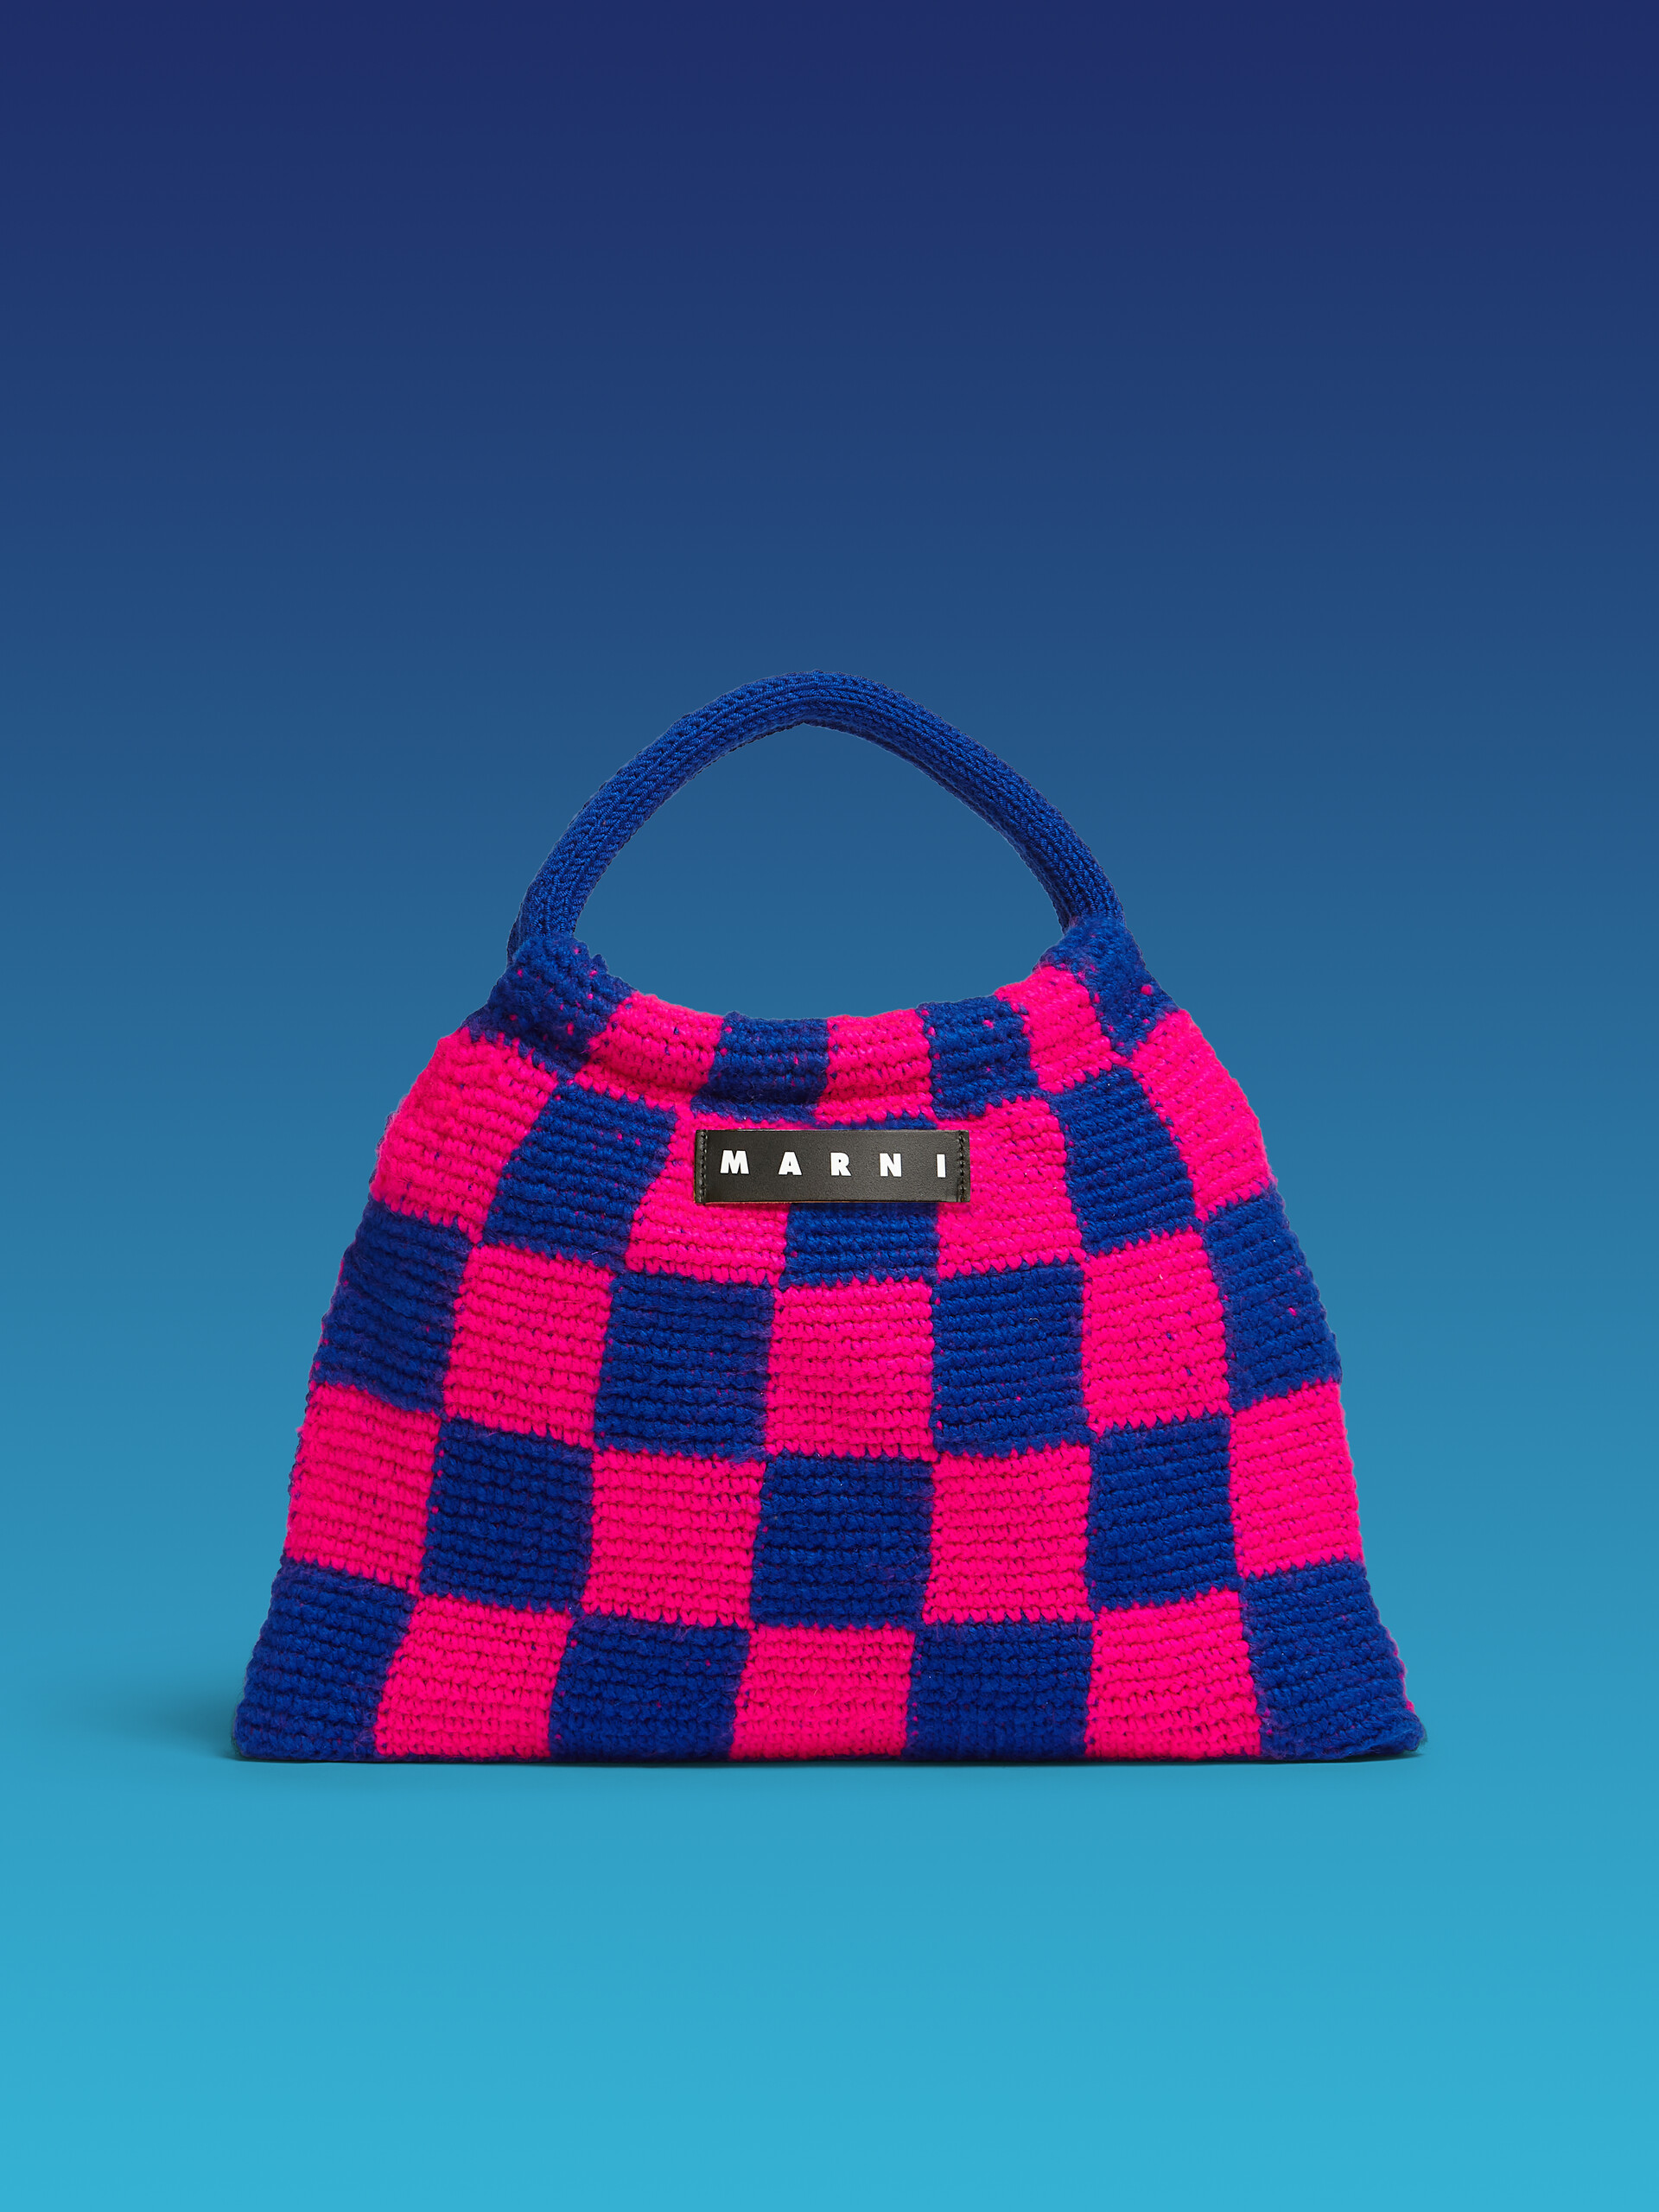 MARNI MARKET bag in pink and blue crochet - Bags - Image 1